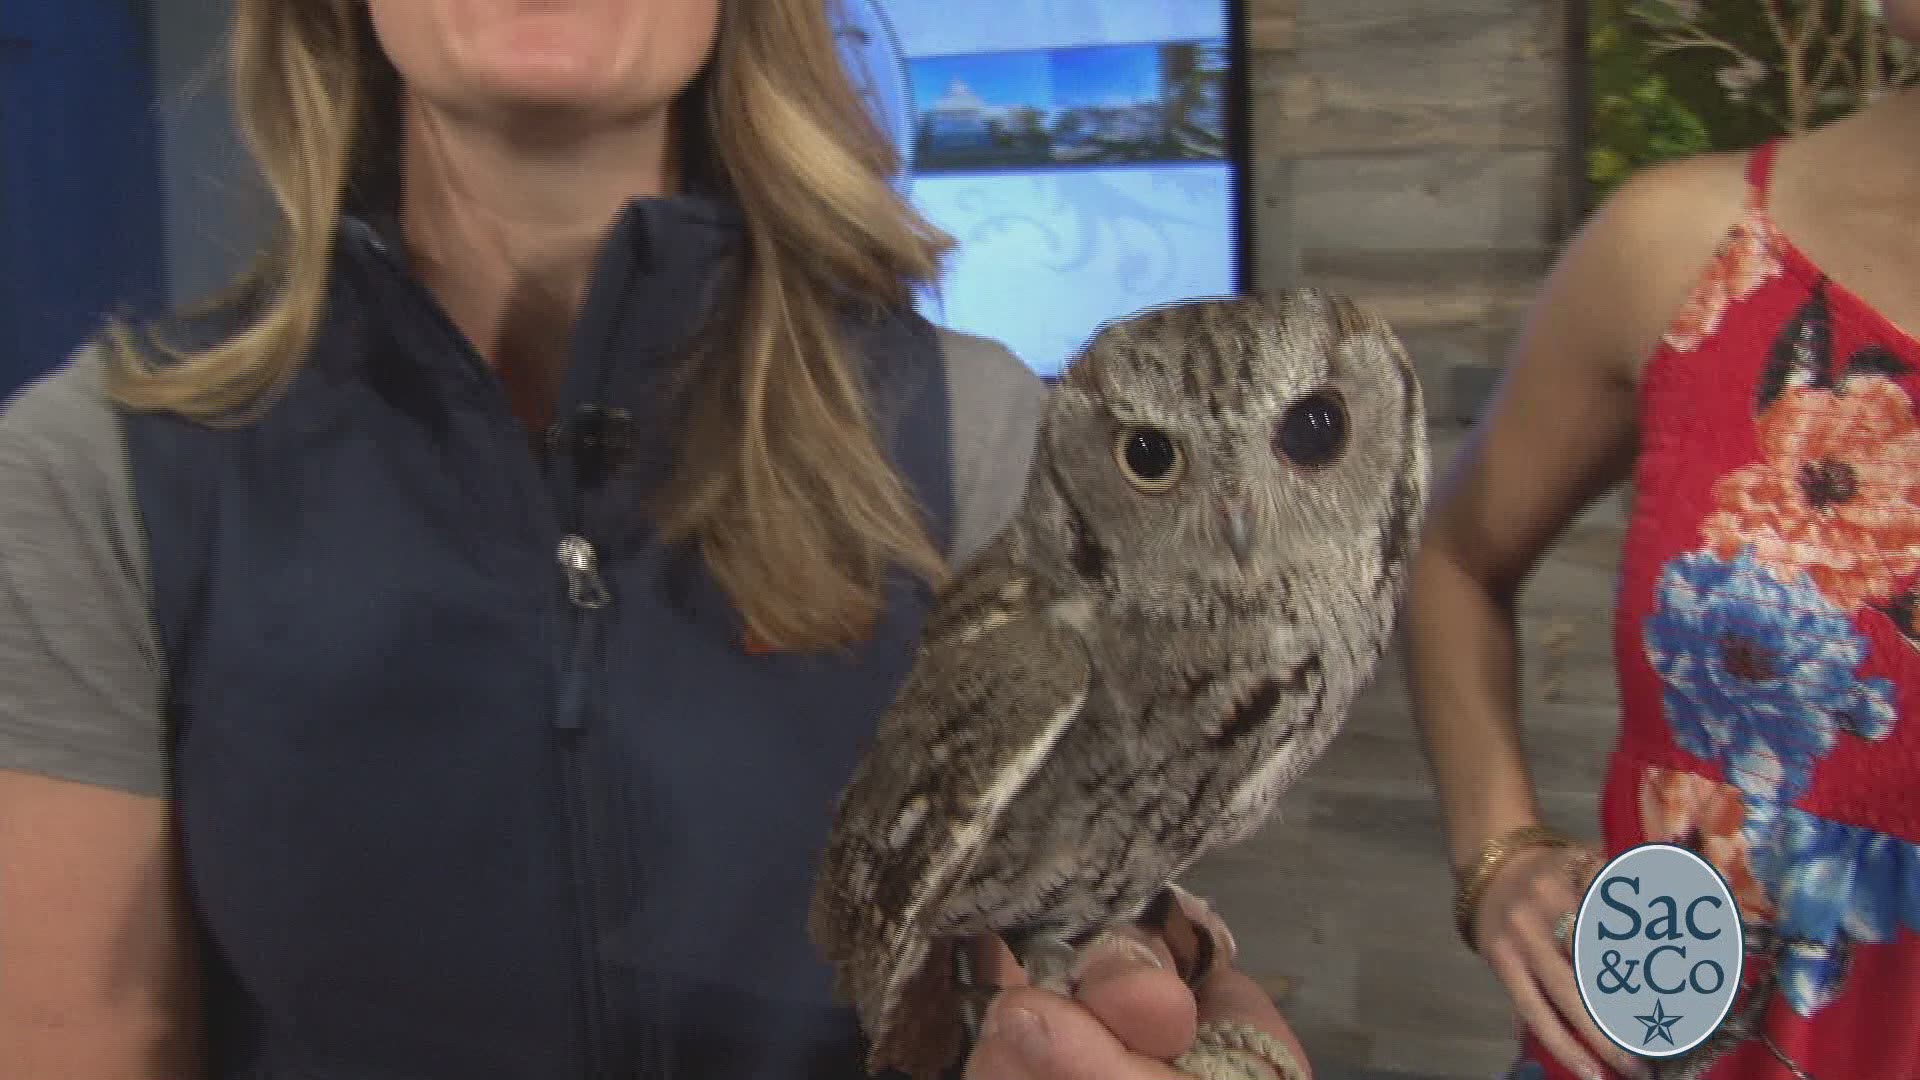 See what animals the Sac Zoo brought on the show today!